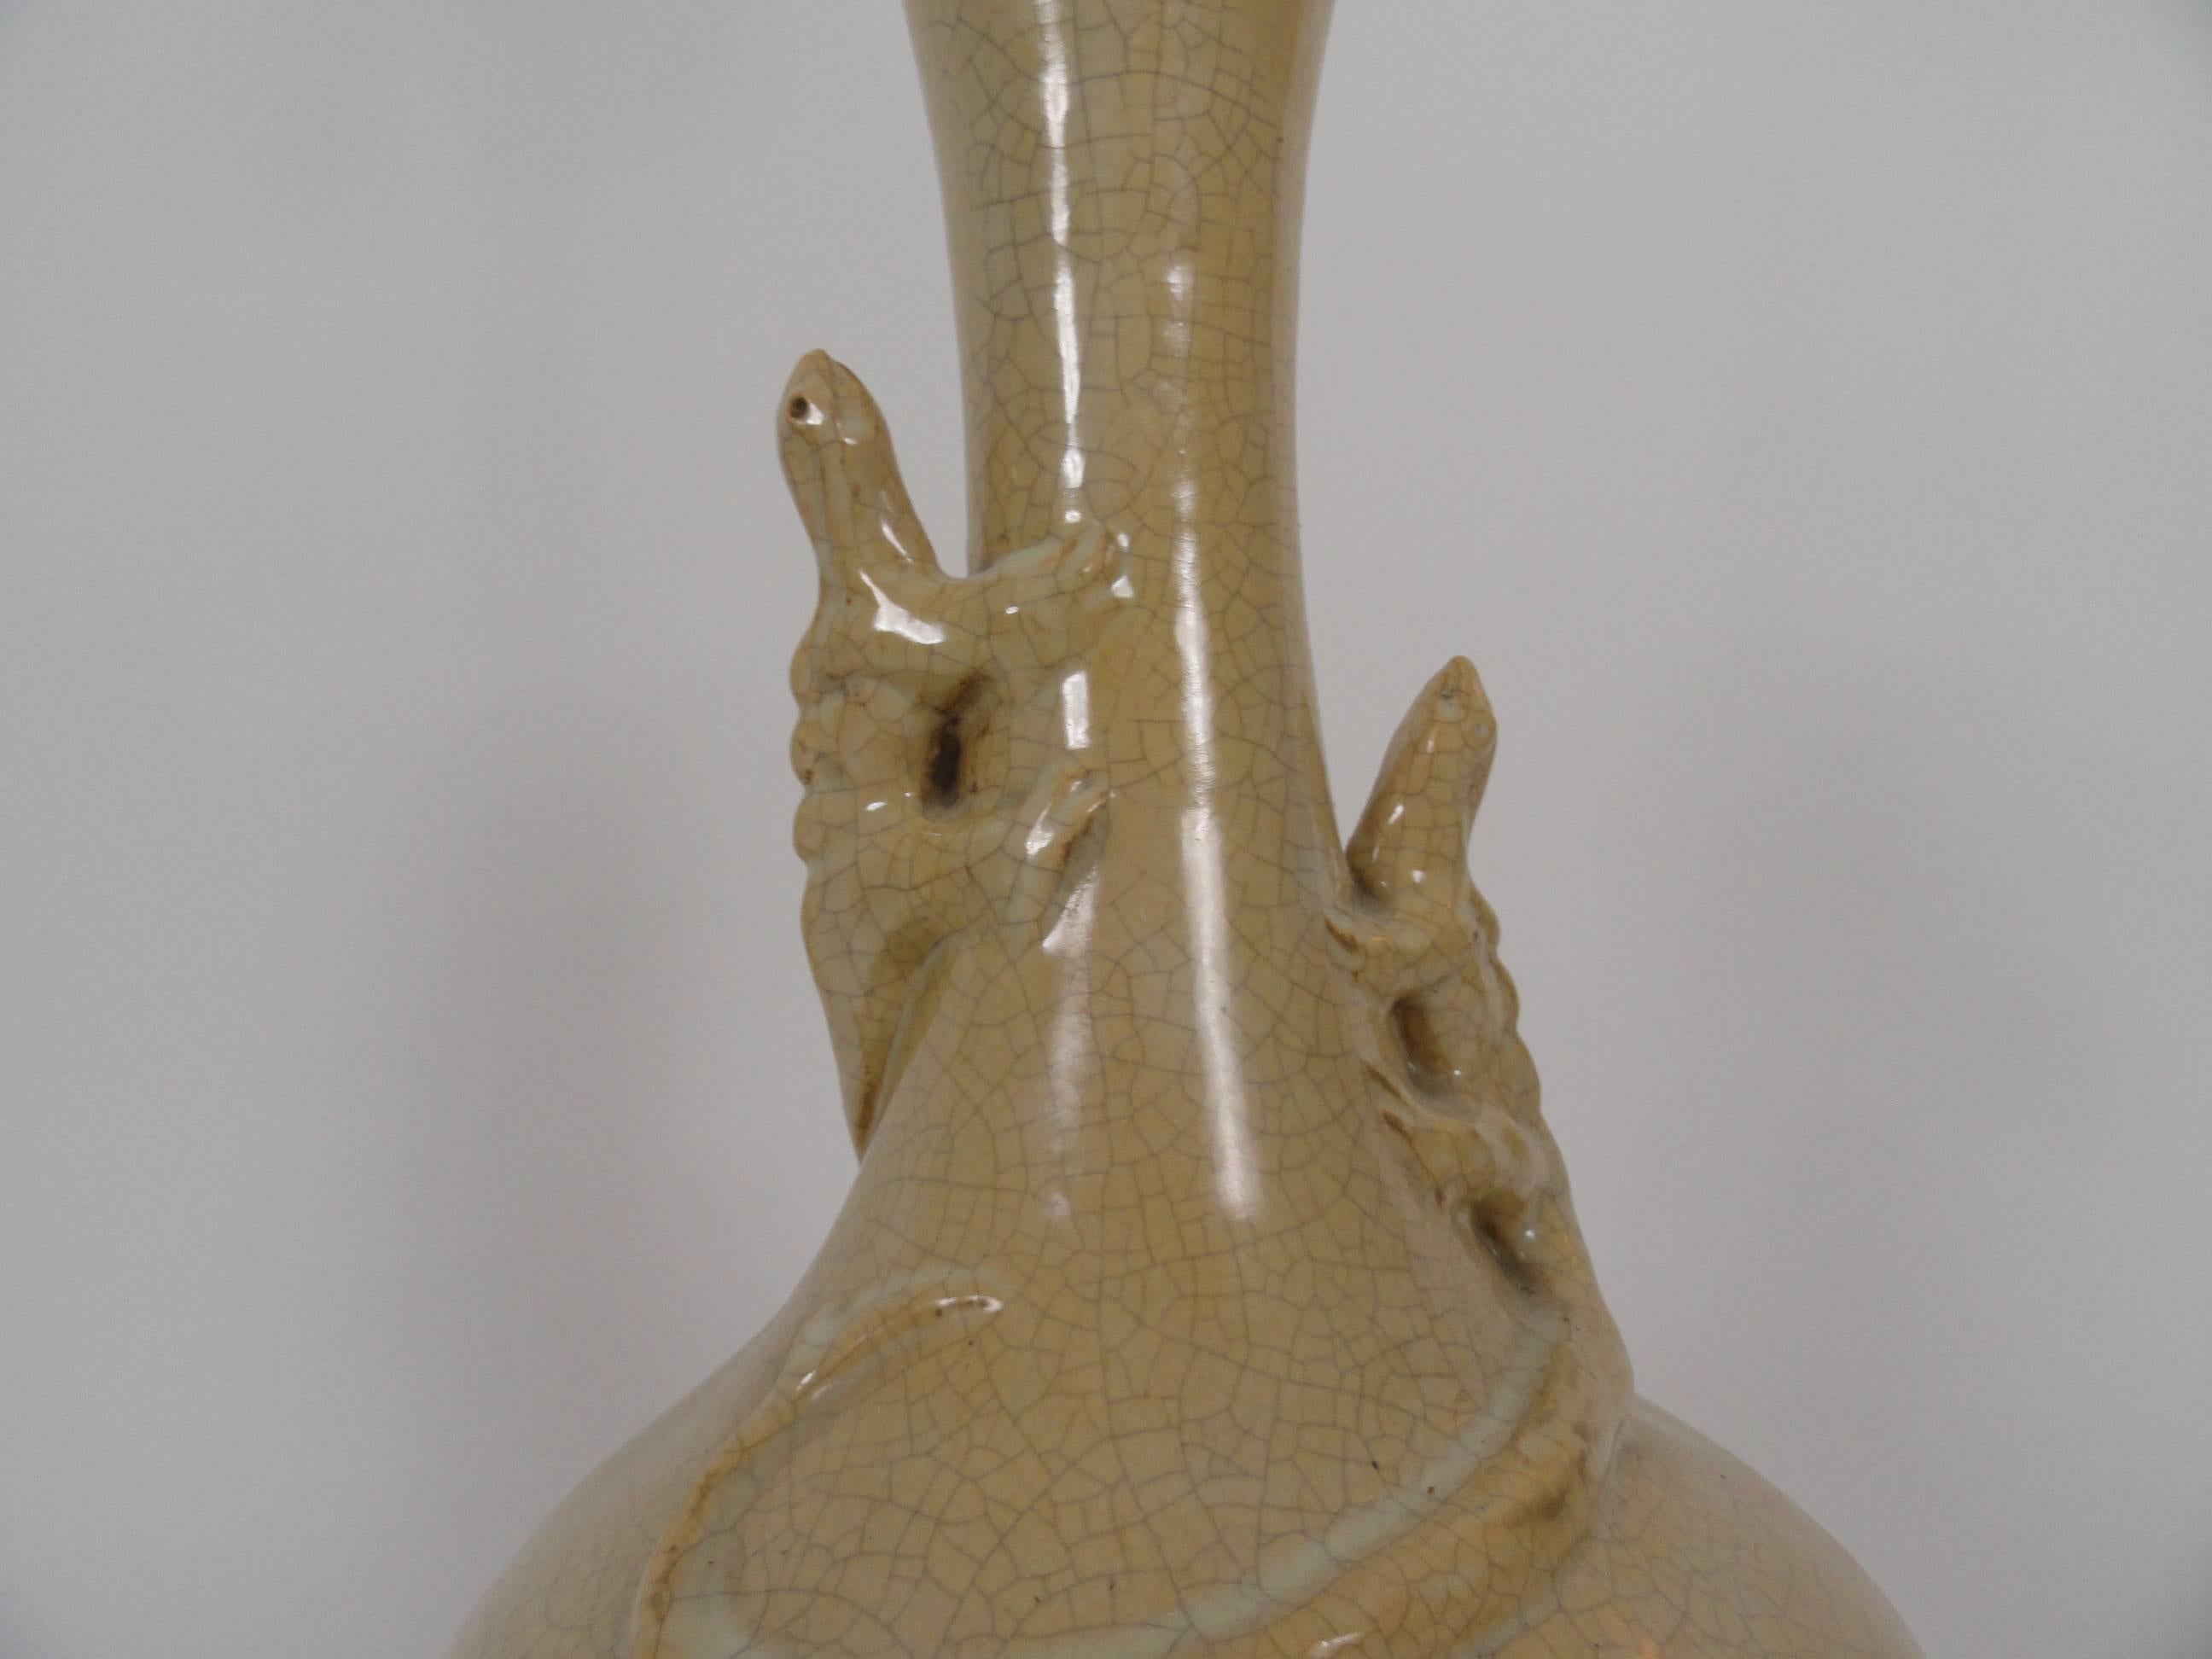 19th century Chinese ceramic lamp with applied lizards. On custom wood base.
Wired with inline switch.